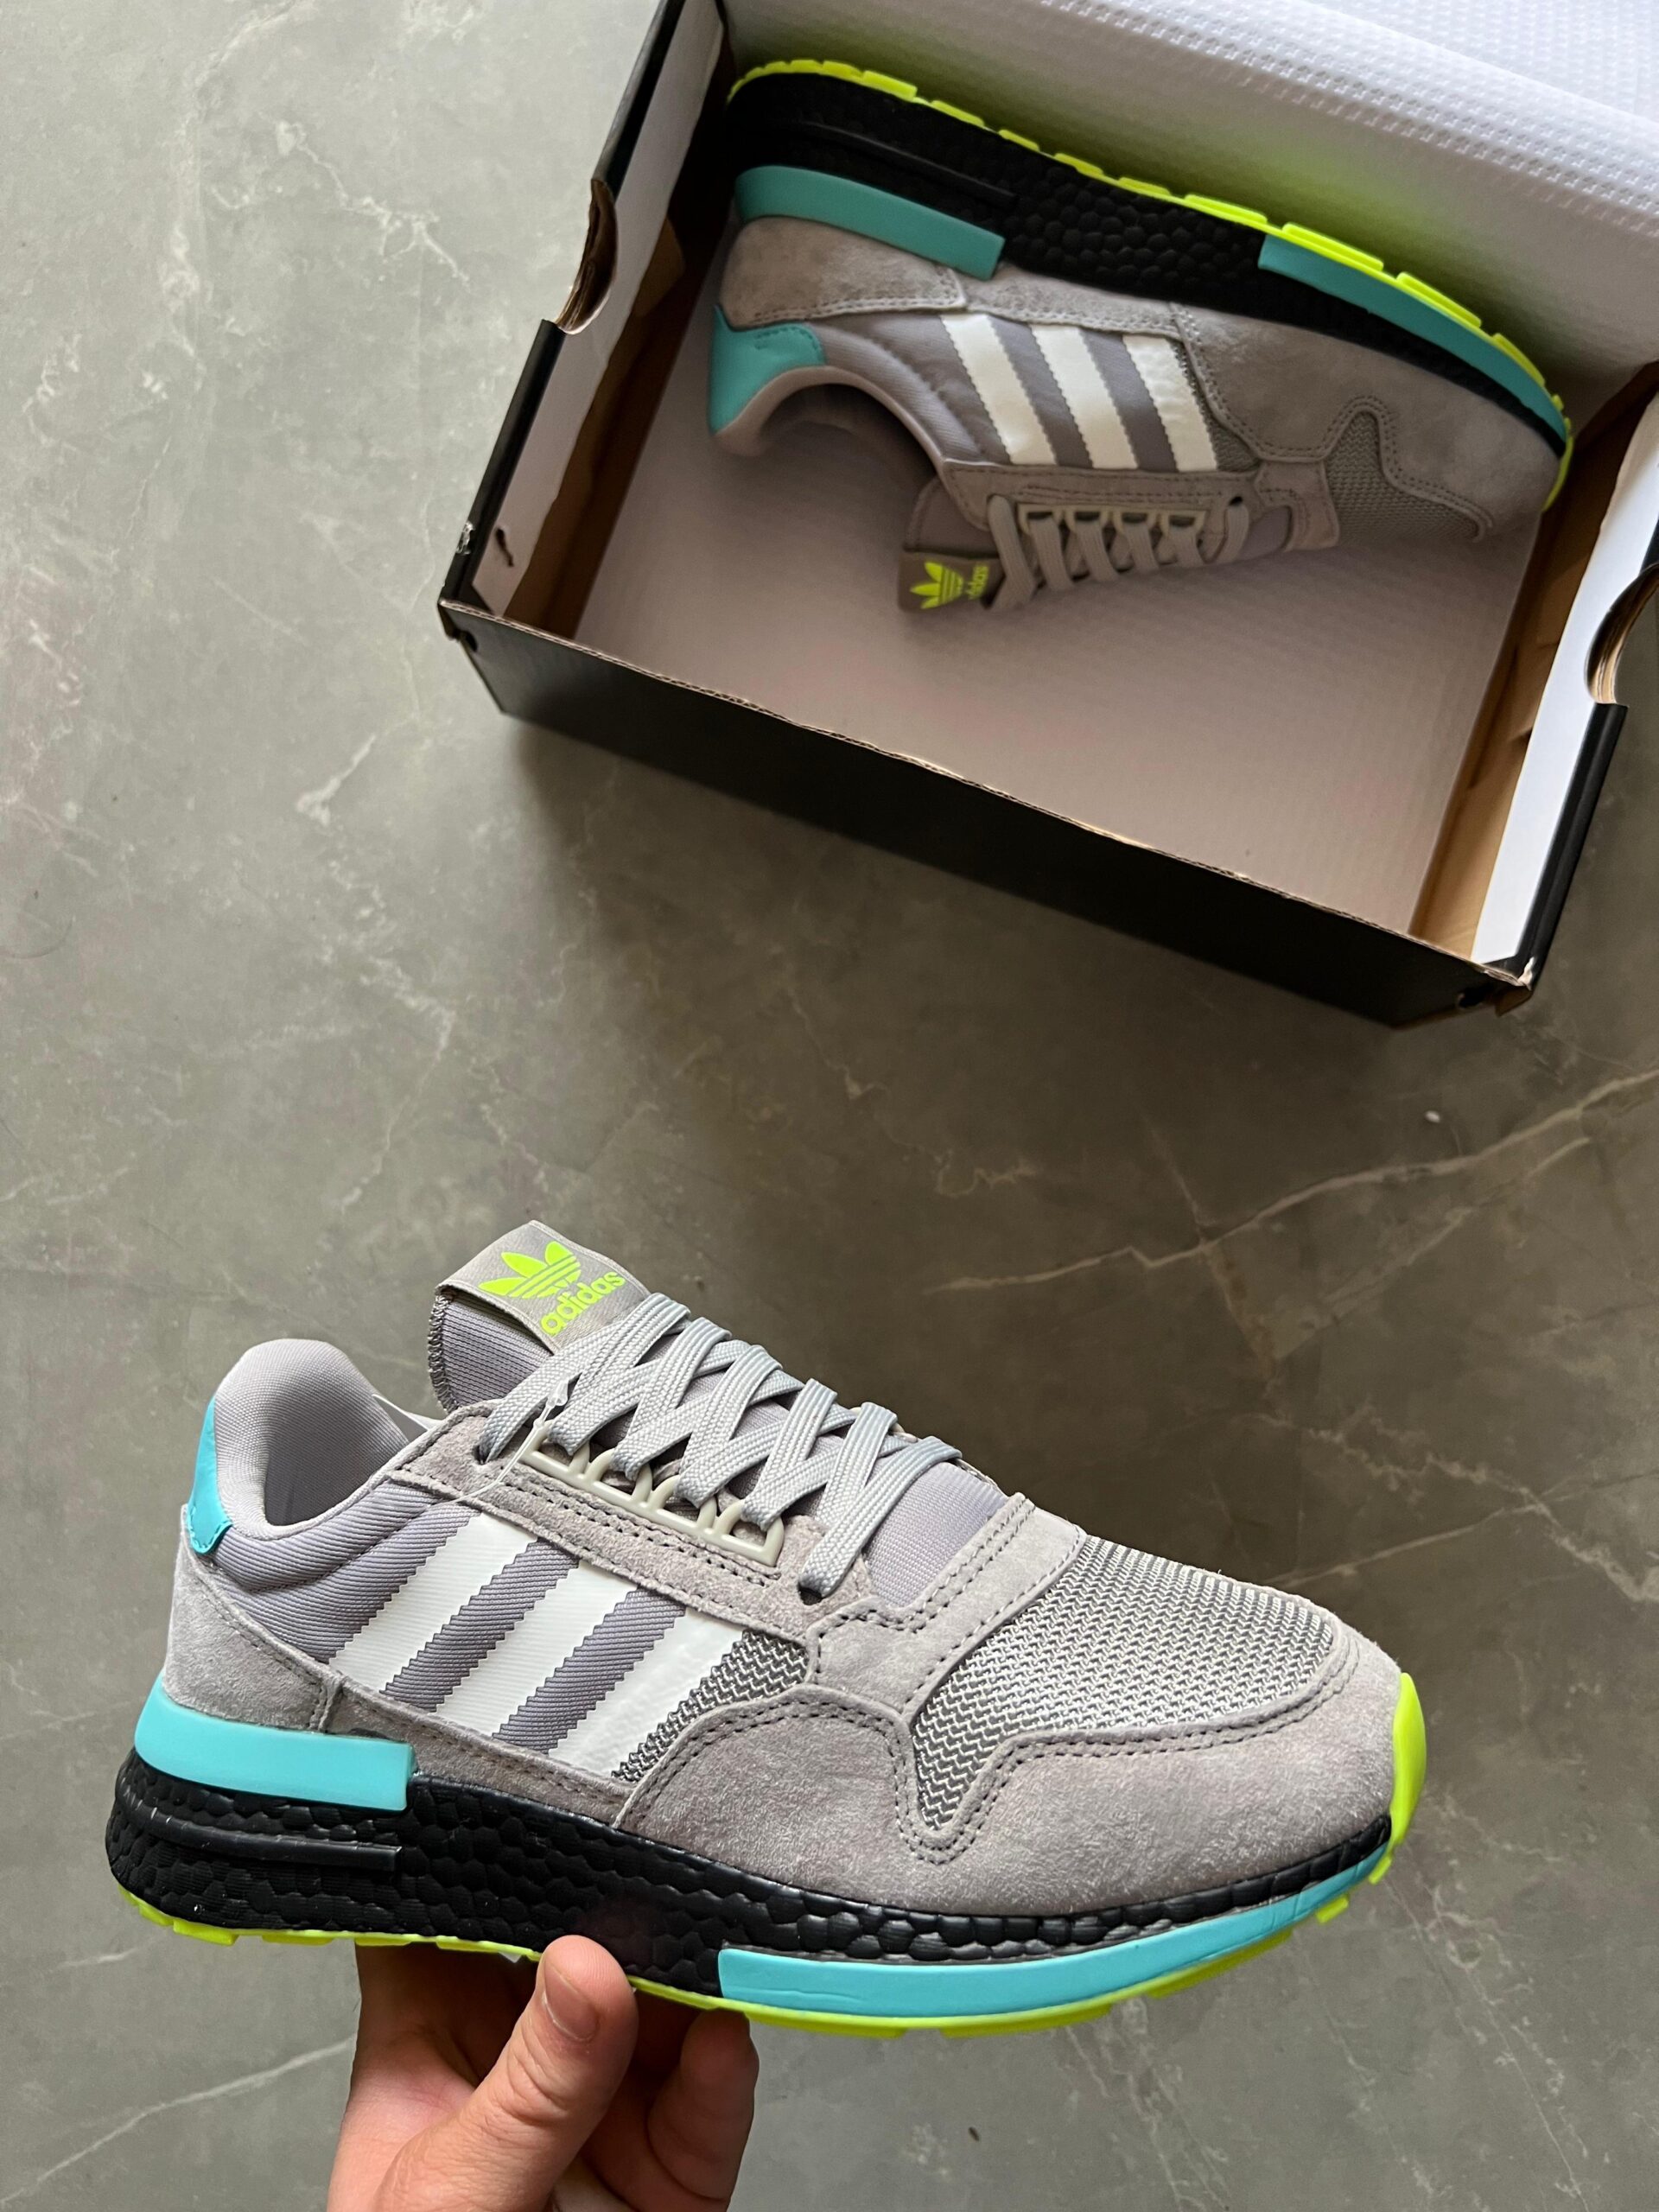 Zx 500 Rm Sneakers Imported 2 Colors